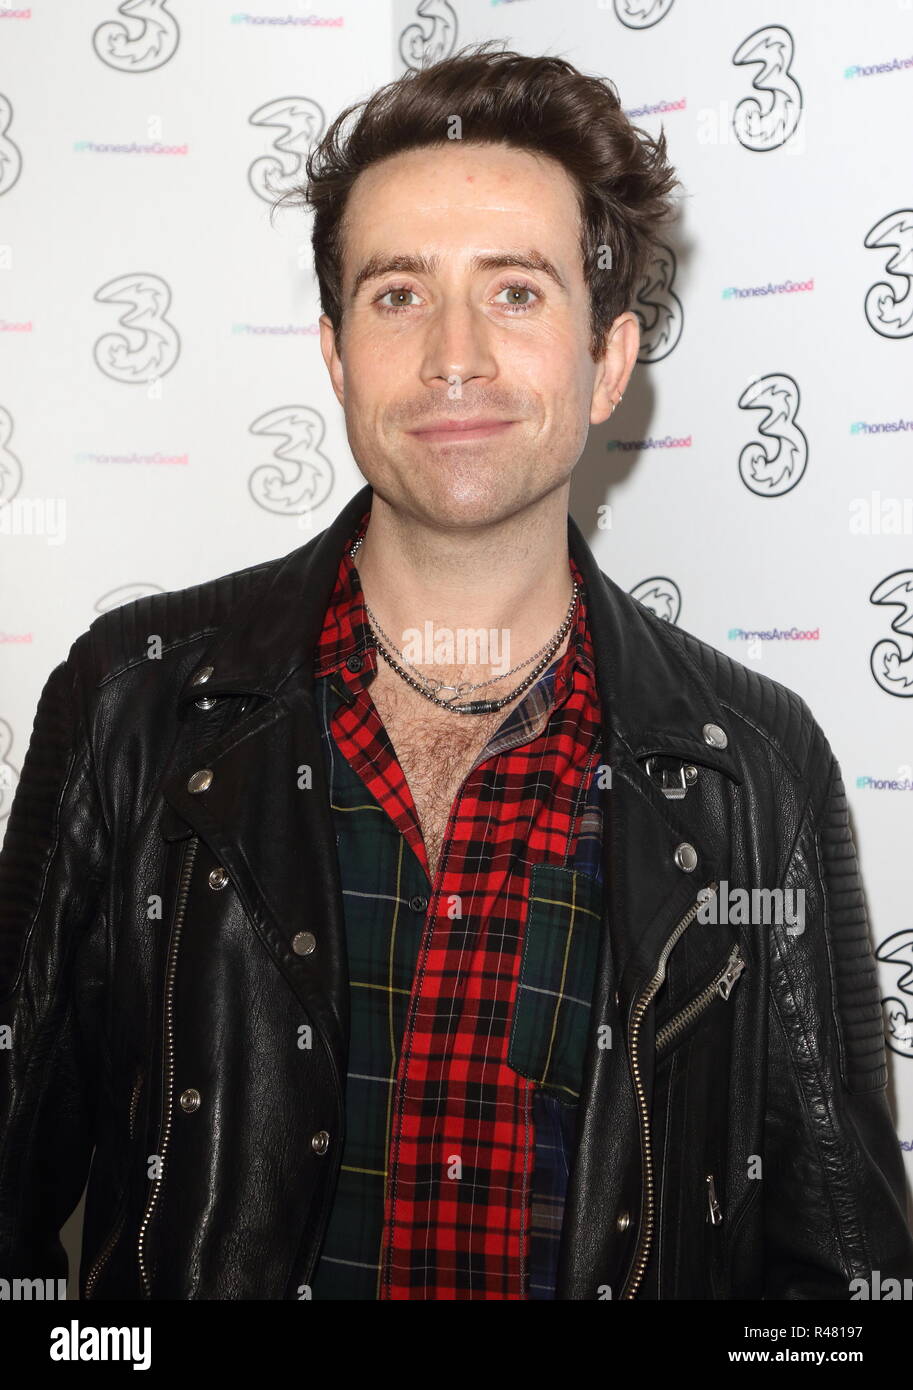 Portr8’s Three Mobiles VIP Gallery Launch at Three Mobile Pop-Up Gallery, Soho Square, London  Featuring: Nick Grimshaw Where: London, United Kingdom When: 25 Oct 2018 Credit: WENN.com Stock Photo